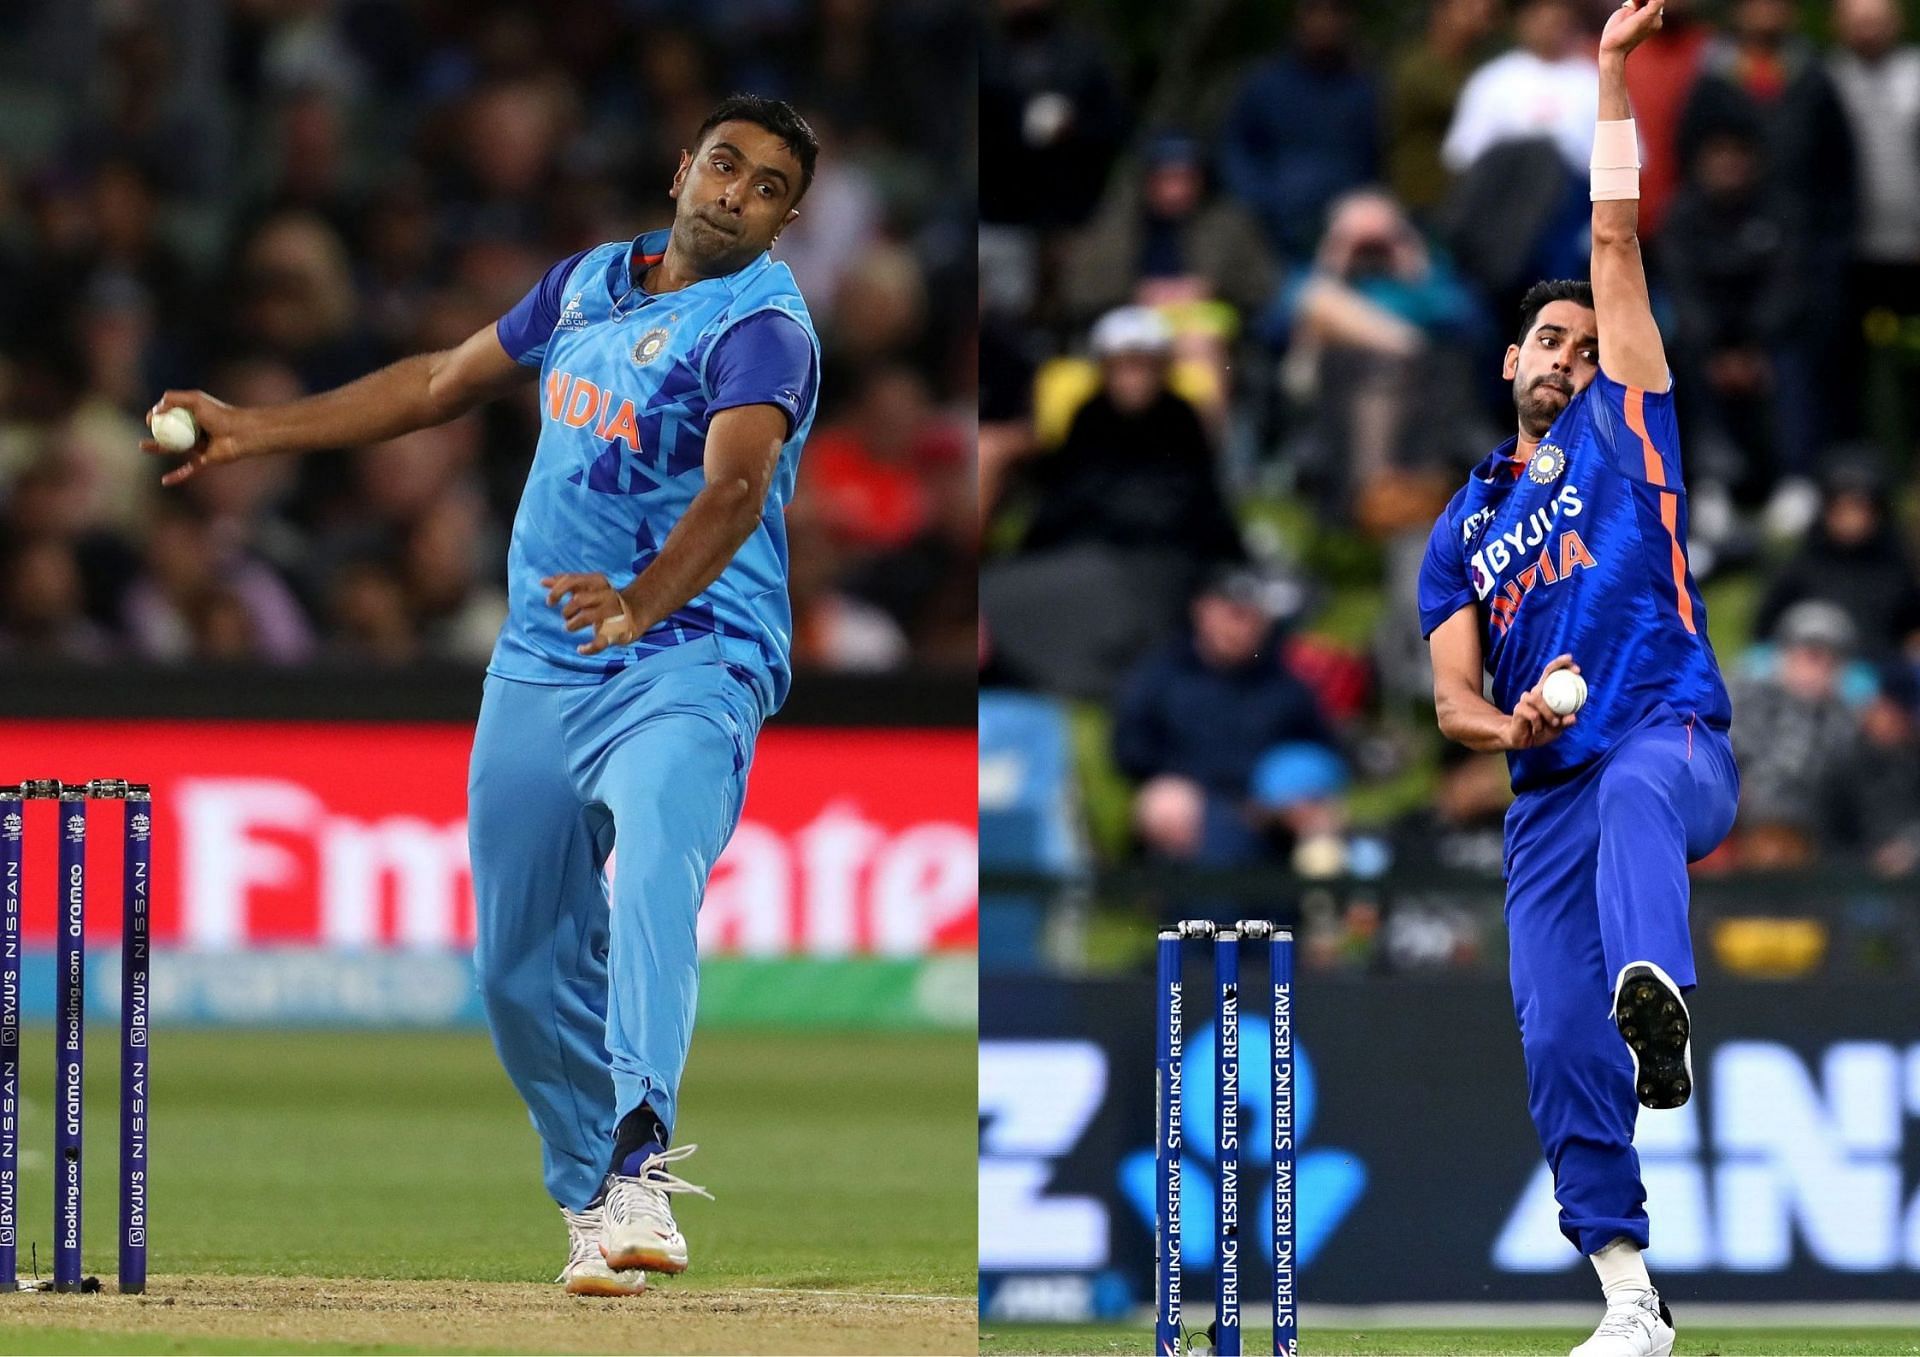 Ravichandran Ashwin and Deepak Chahar have been out of the reckoning as far as India